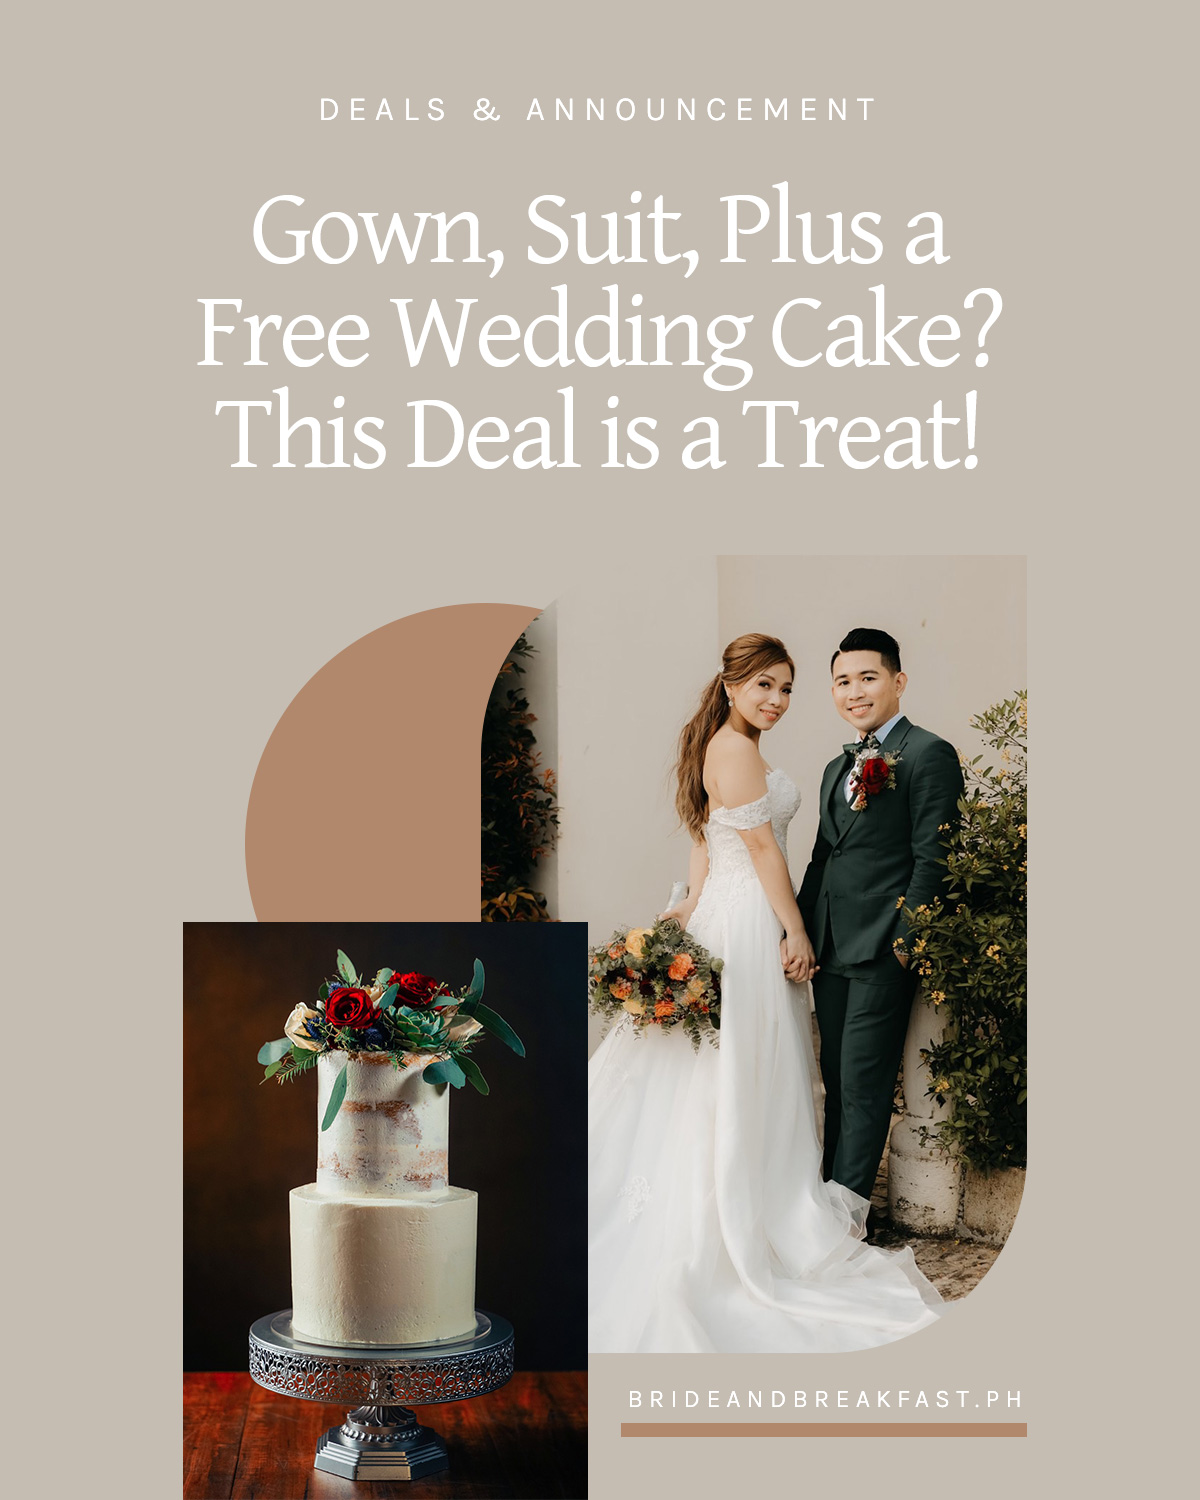 Gown, Suit, Plus a Free Wedding Cake? This Deal is a Treat!